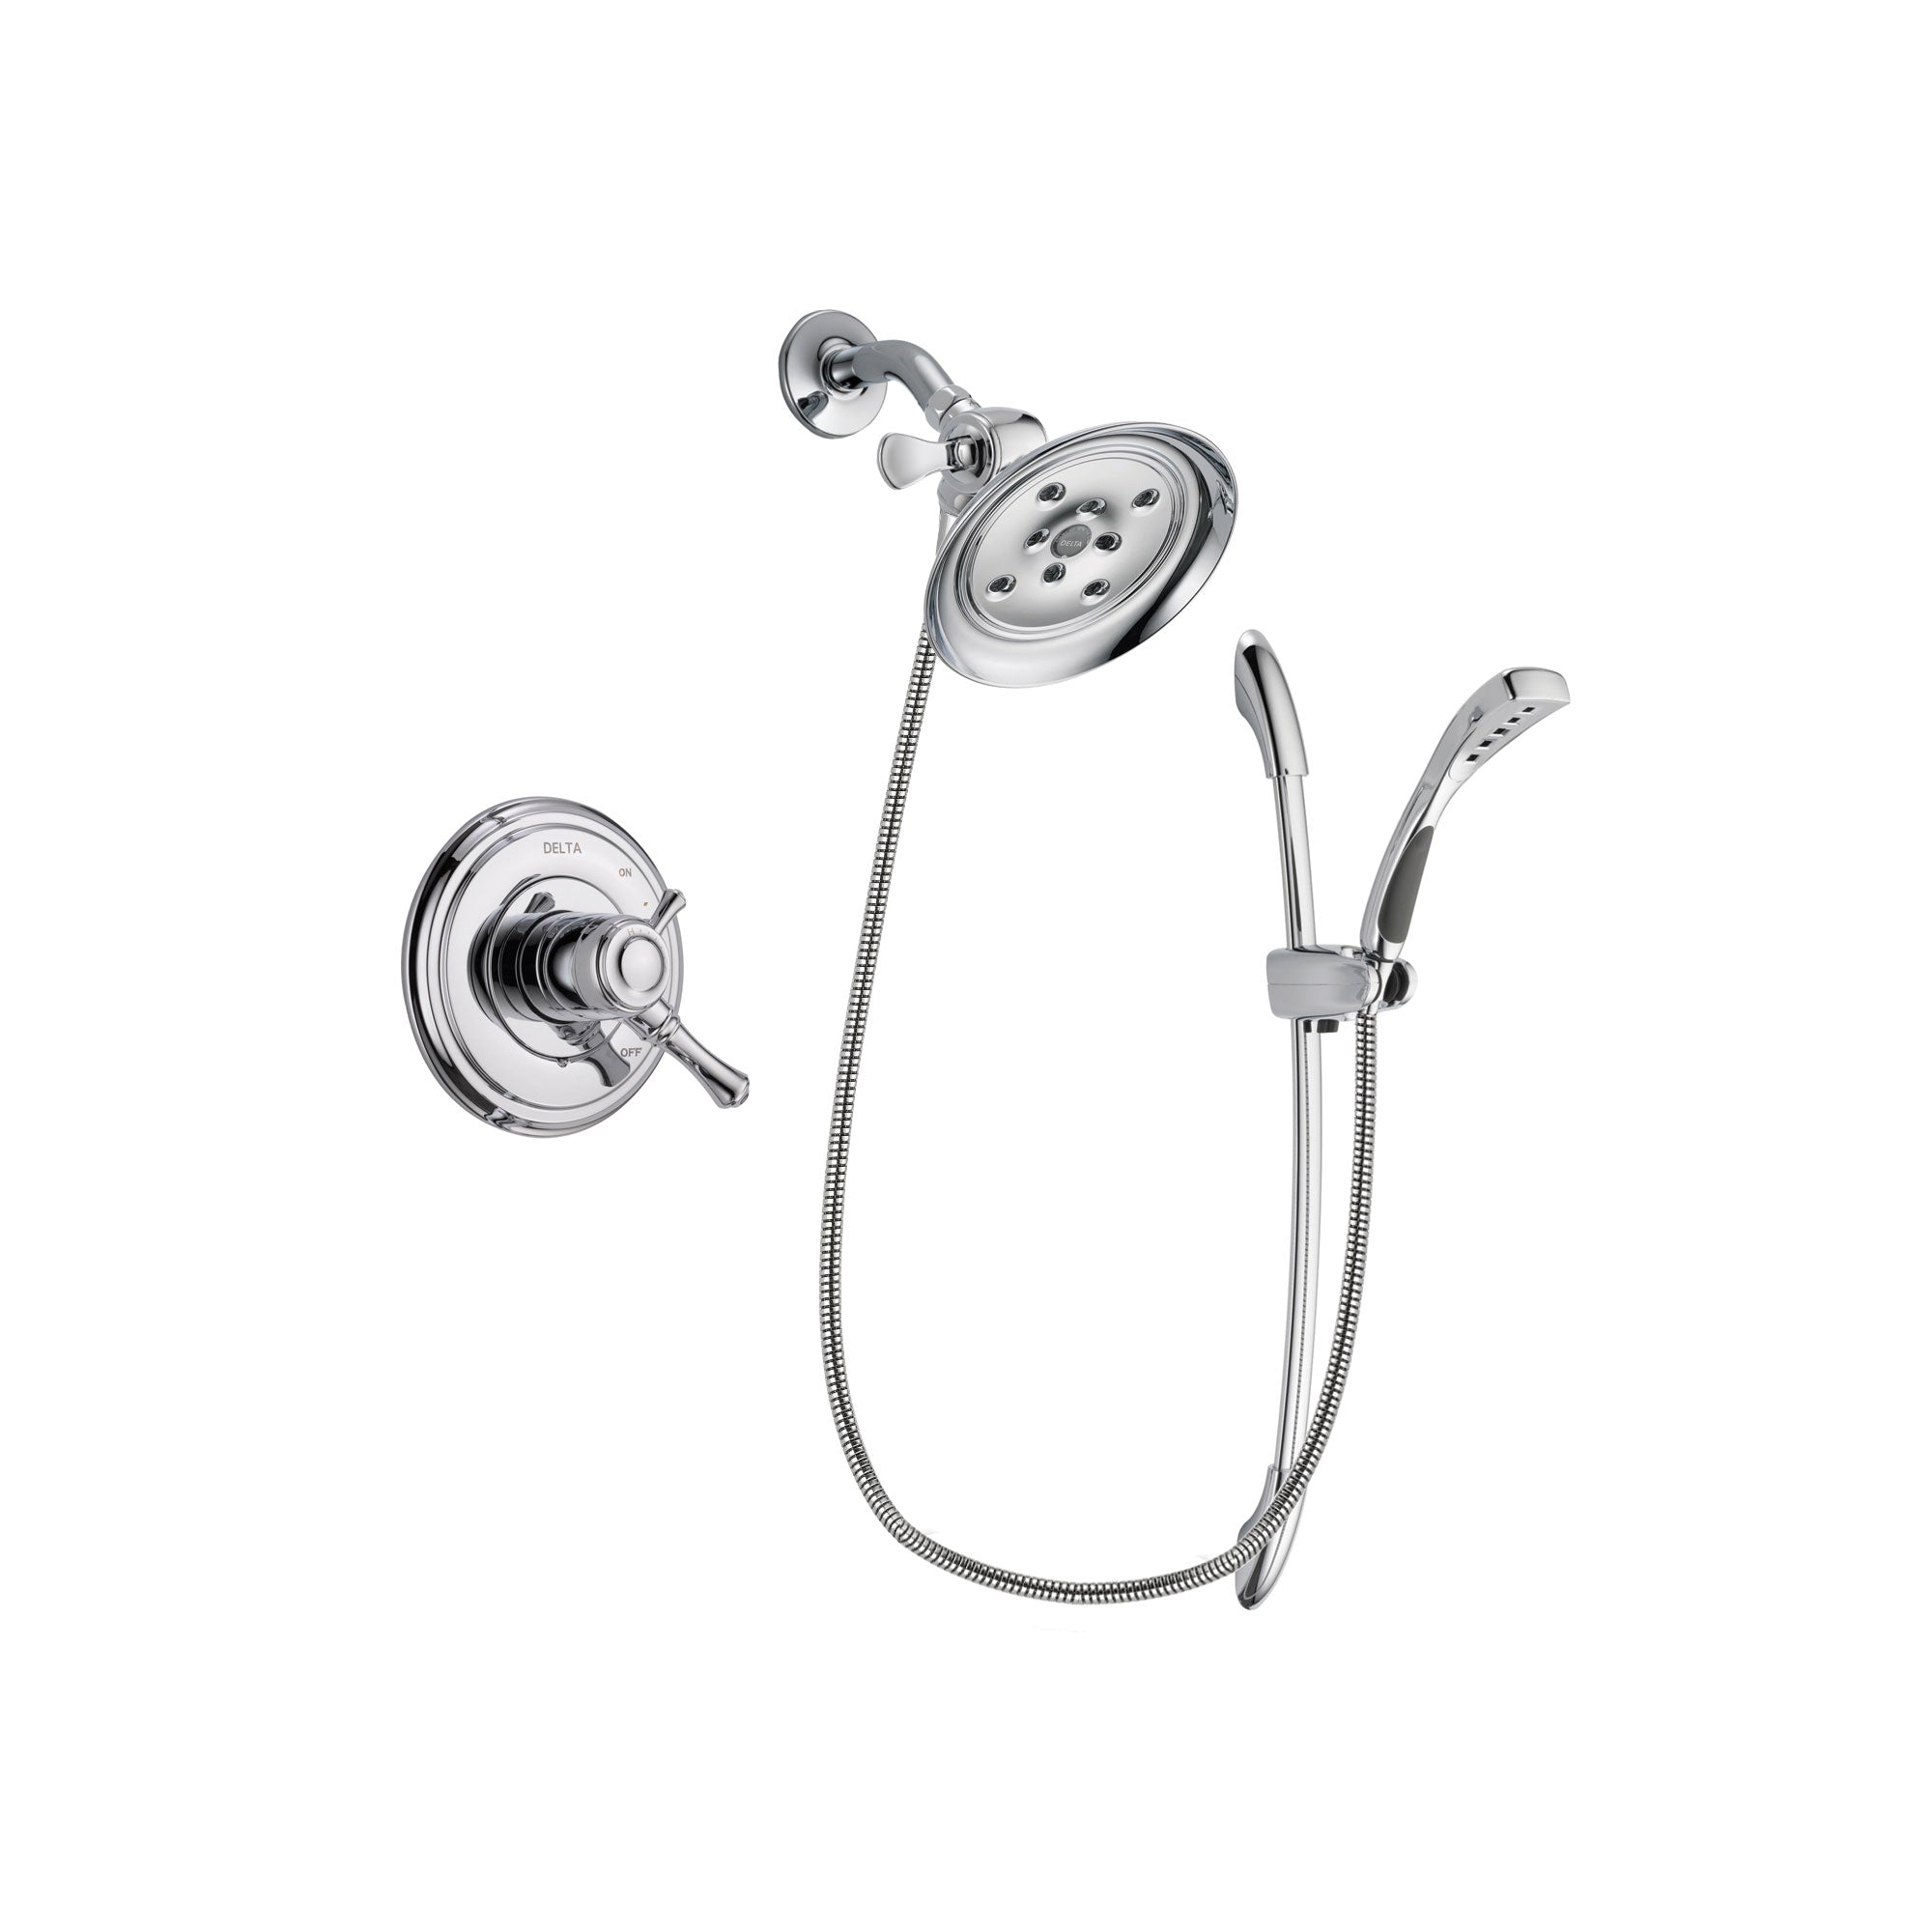 Delta Cassidy Chrome Finish Dual Control Shower Faucet System Package with Large Rain Showerhead and Handheld Shower with Slide Bar Includes Rough-in Valve DSP0526V